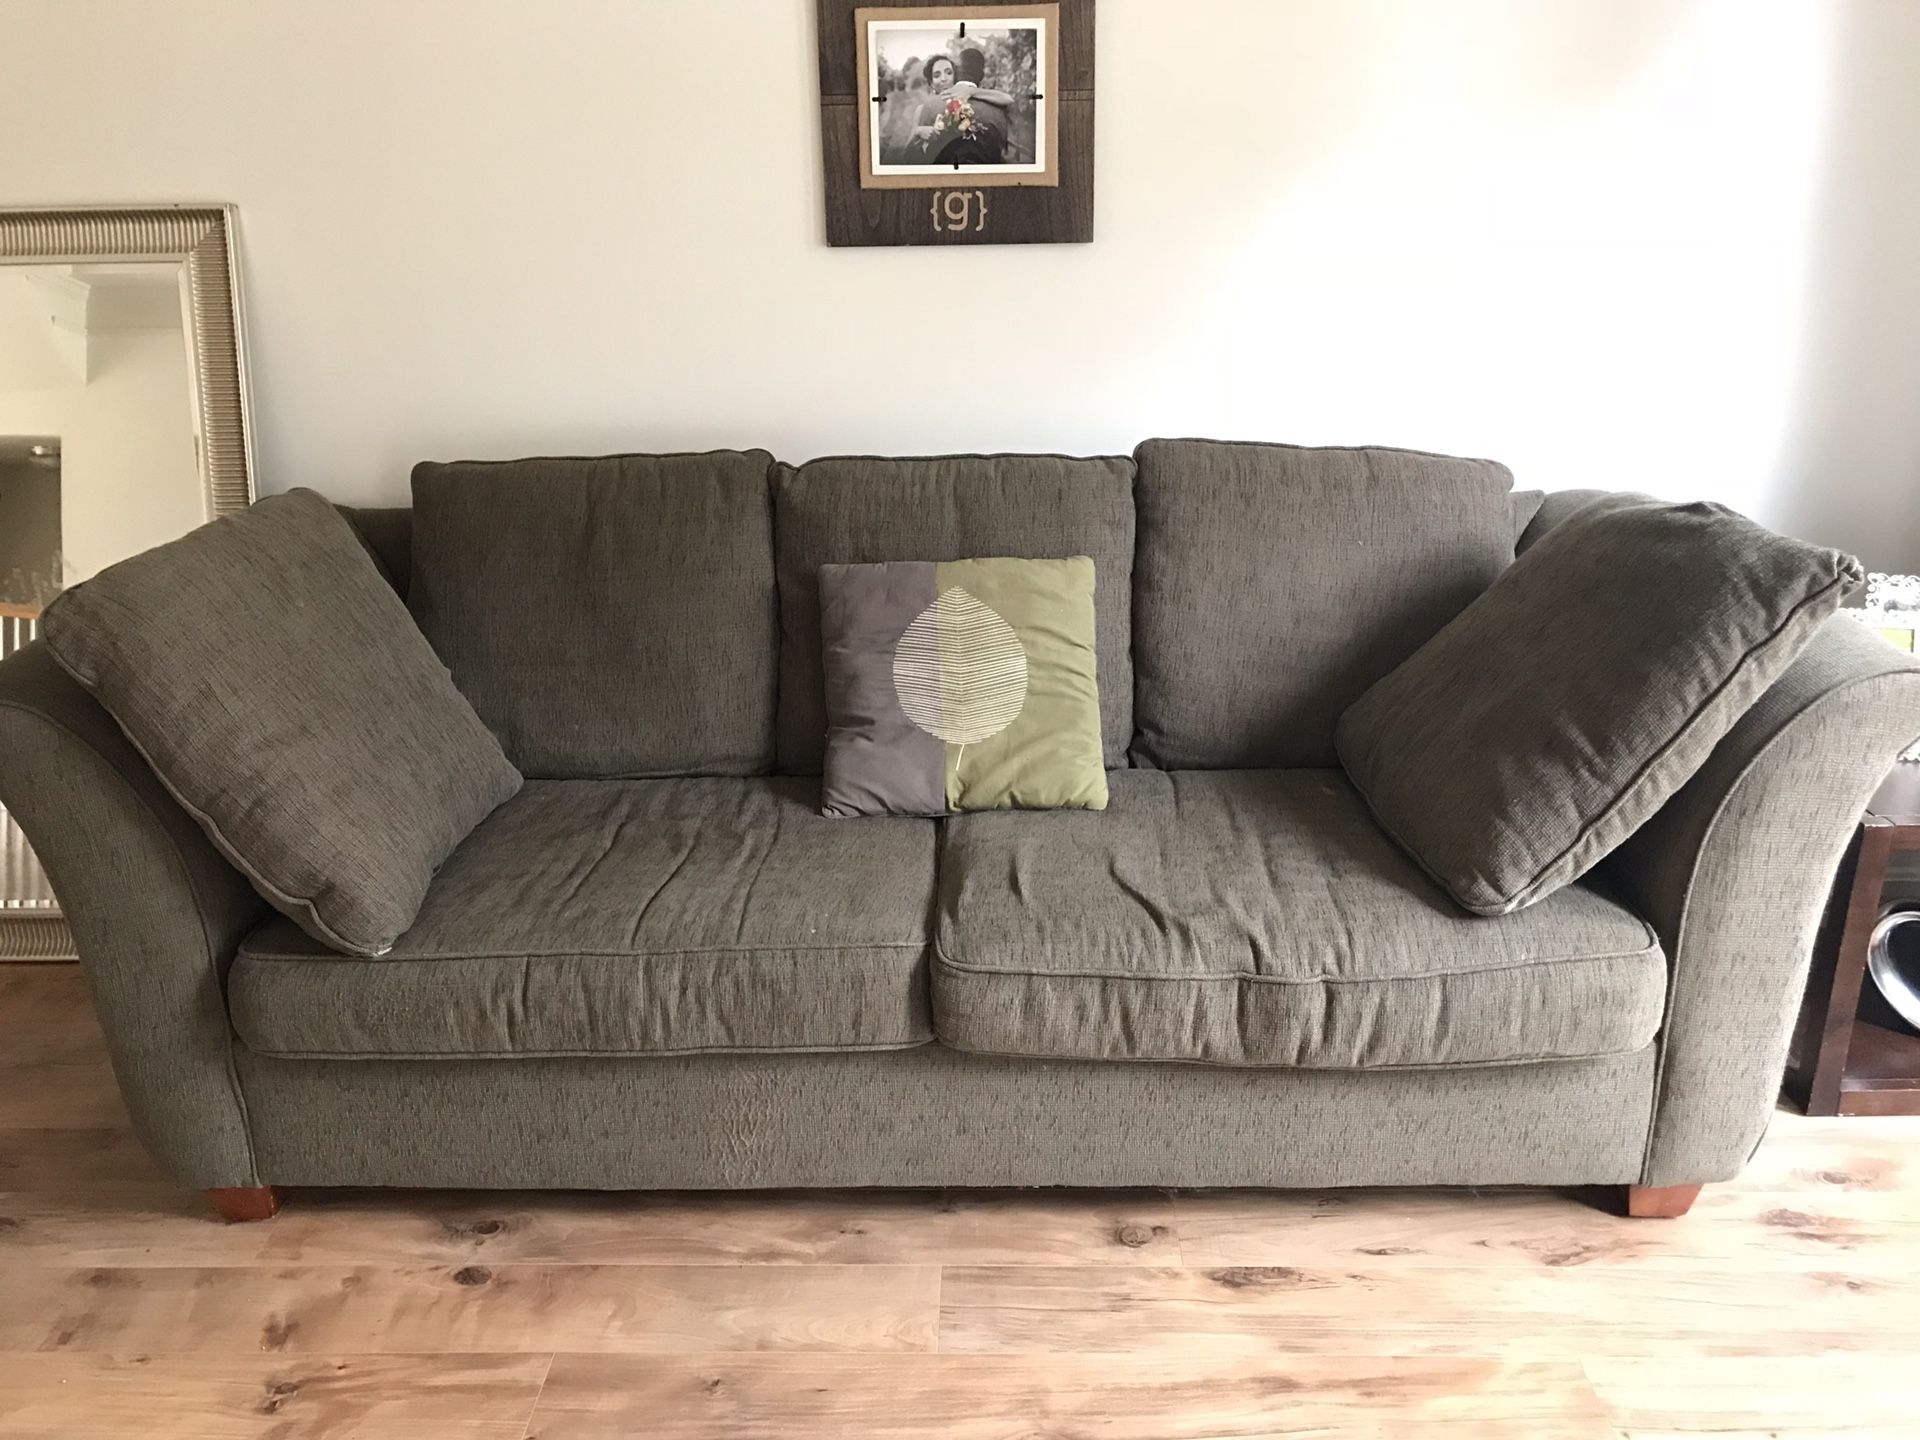 FULL LIVING ROOM COUCH SET FOR SALE